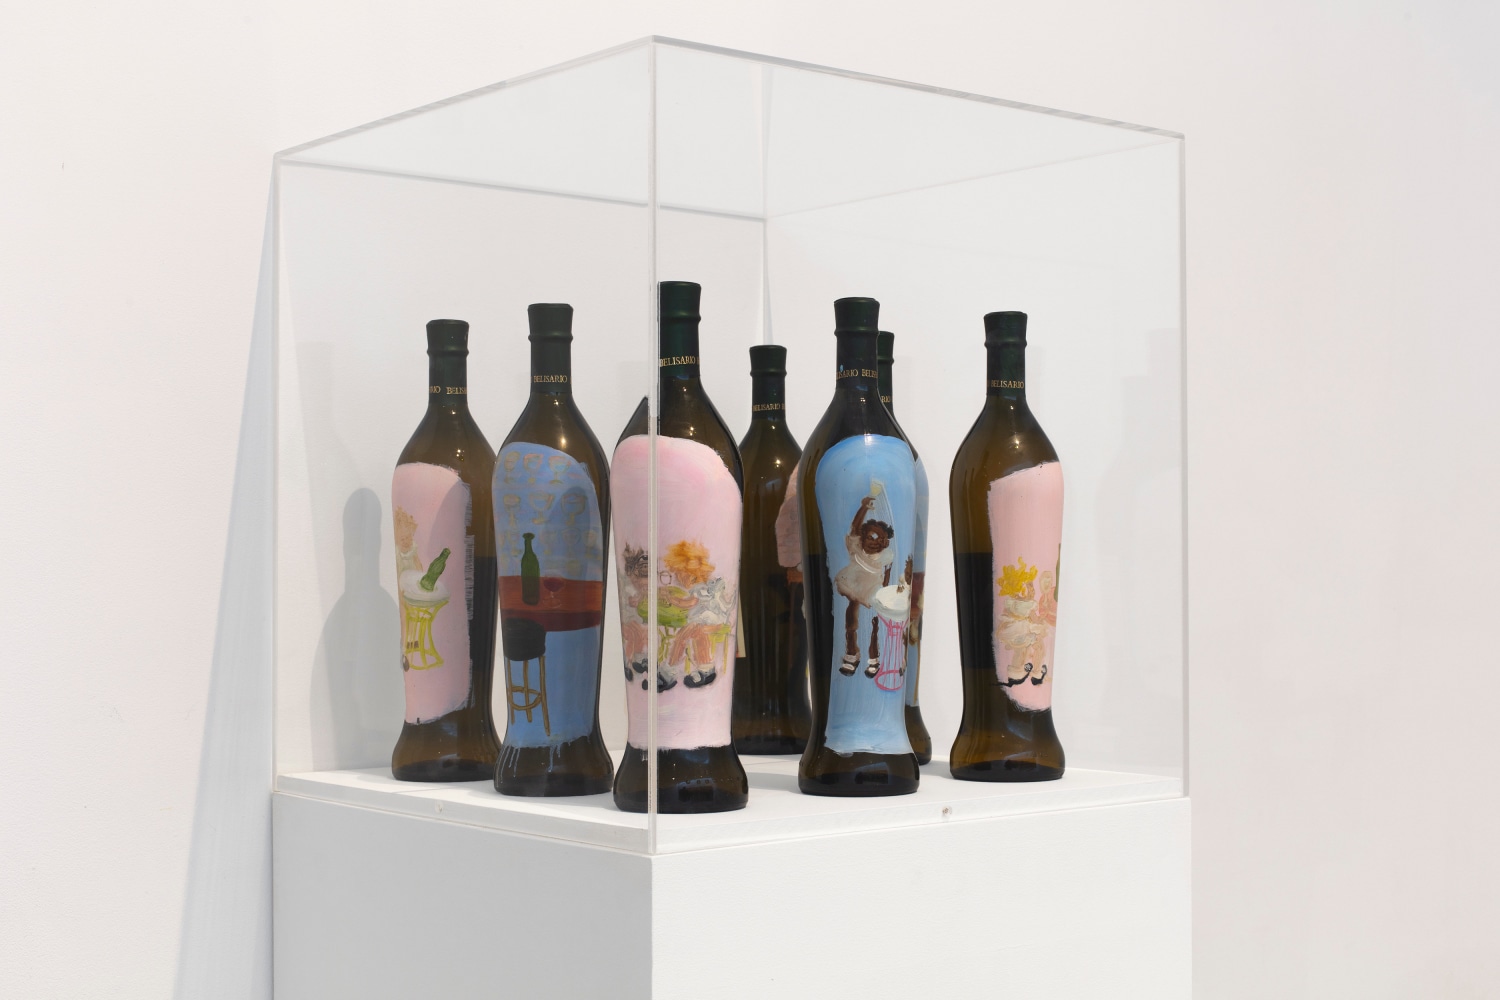 a plexiglass vitrine filled with a series of seven bottles of Verdicchio painted with images of girls